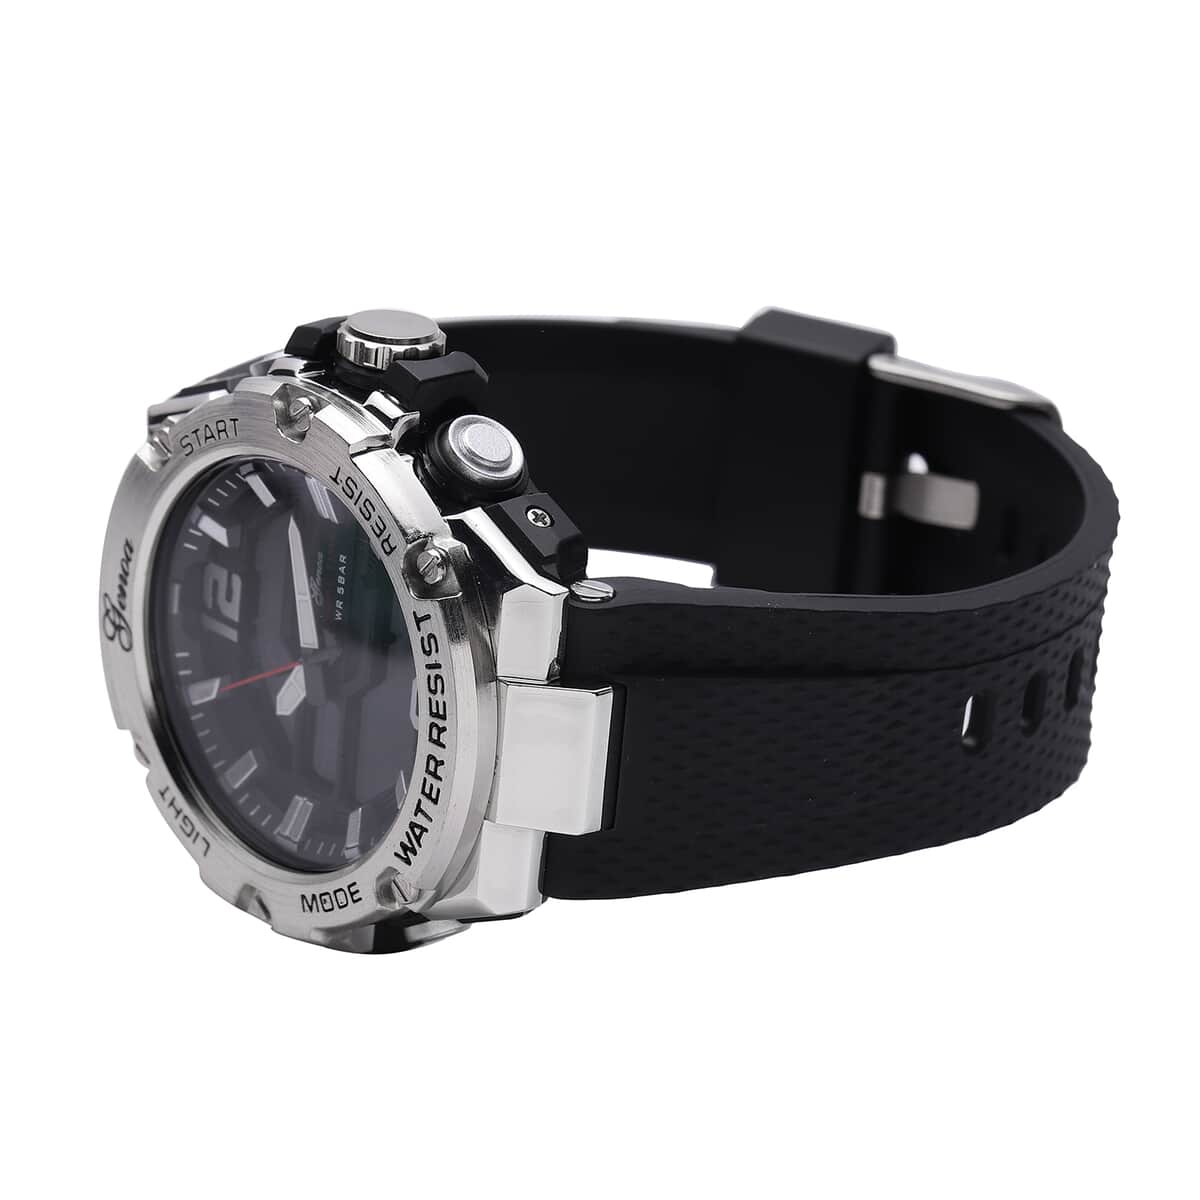 Genoa Japanese and Electronic Movement Multifunctional Key Watch in Black Silicone Strap (48 mm) image number 3